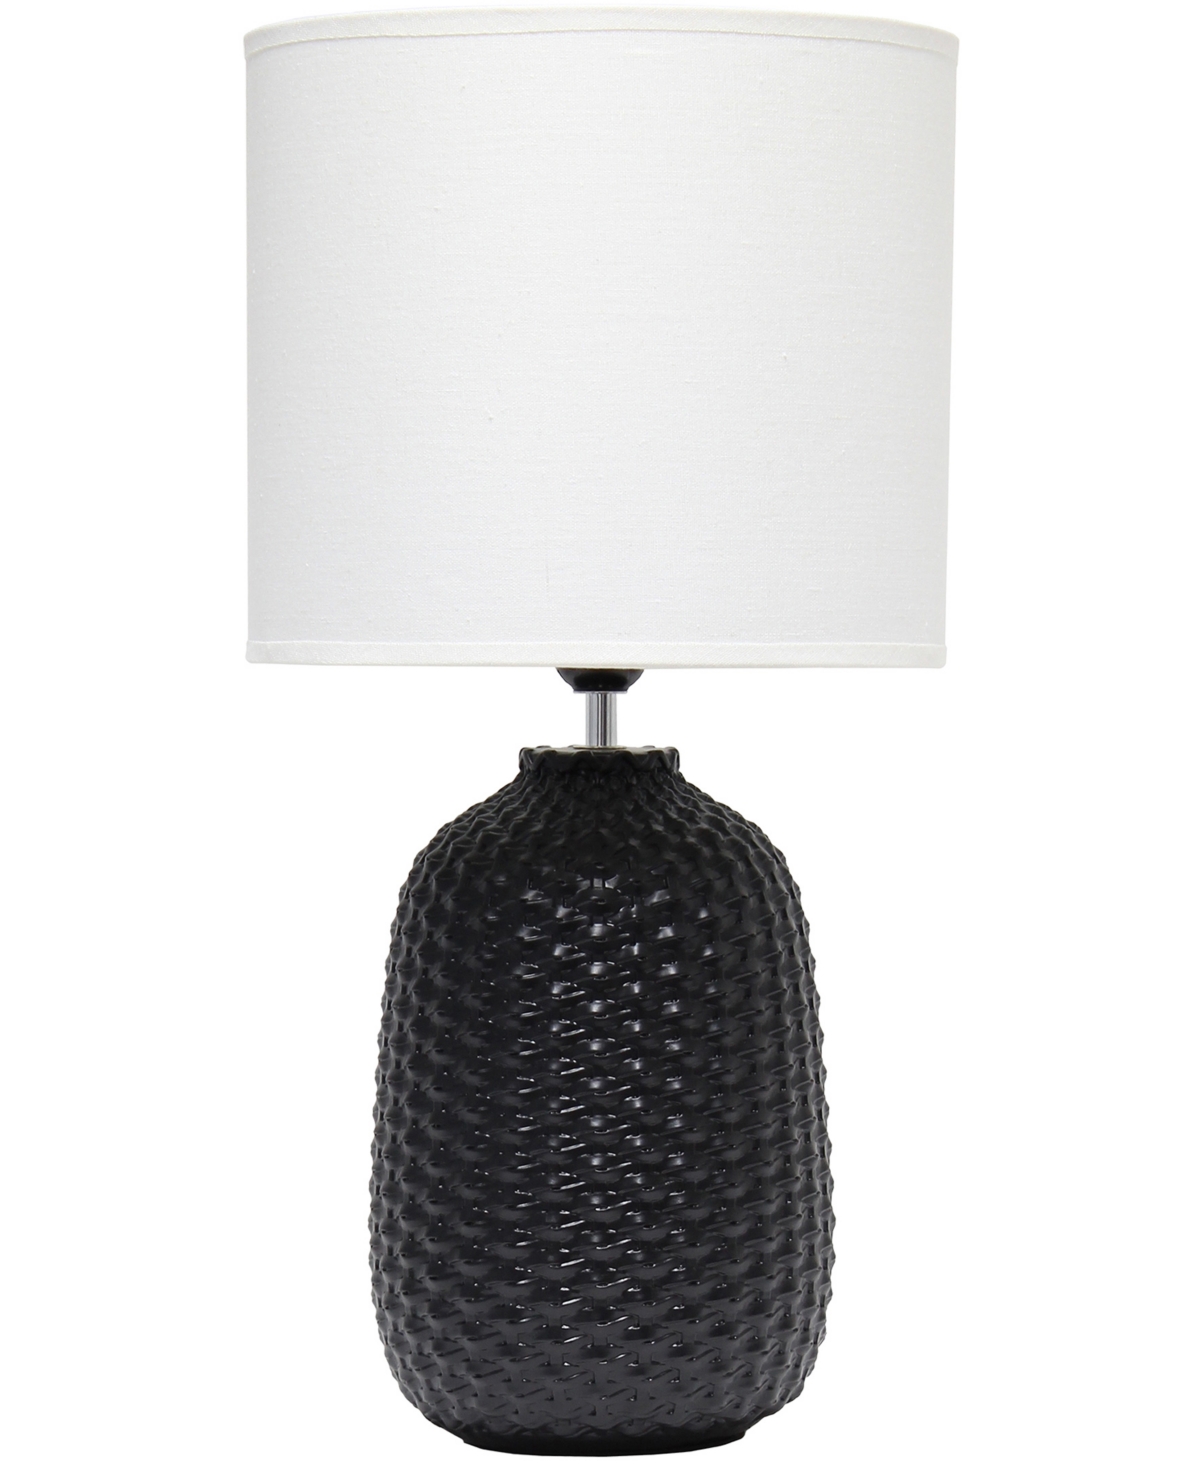 Shop Simple Designs 20.4" Tall Traditional Ceramic Purled Texture Bedside Table Desk Lamp With White Fabric Drum Shade In Black